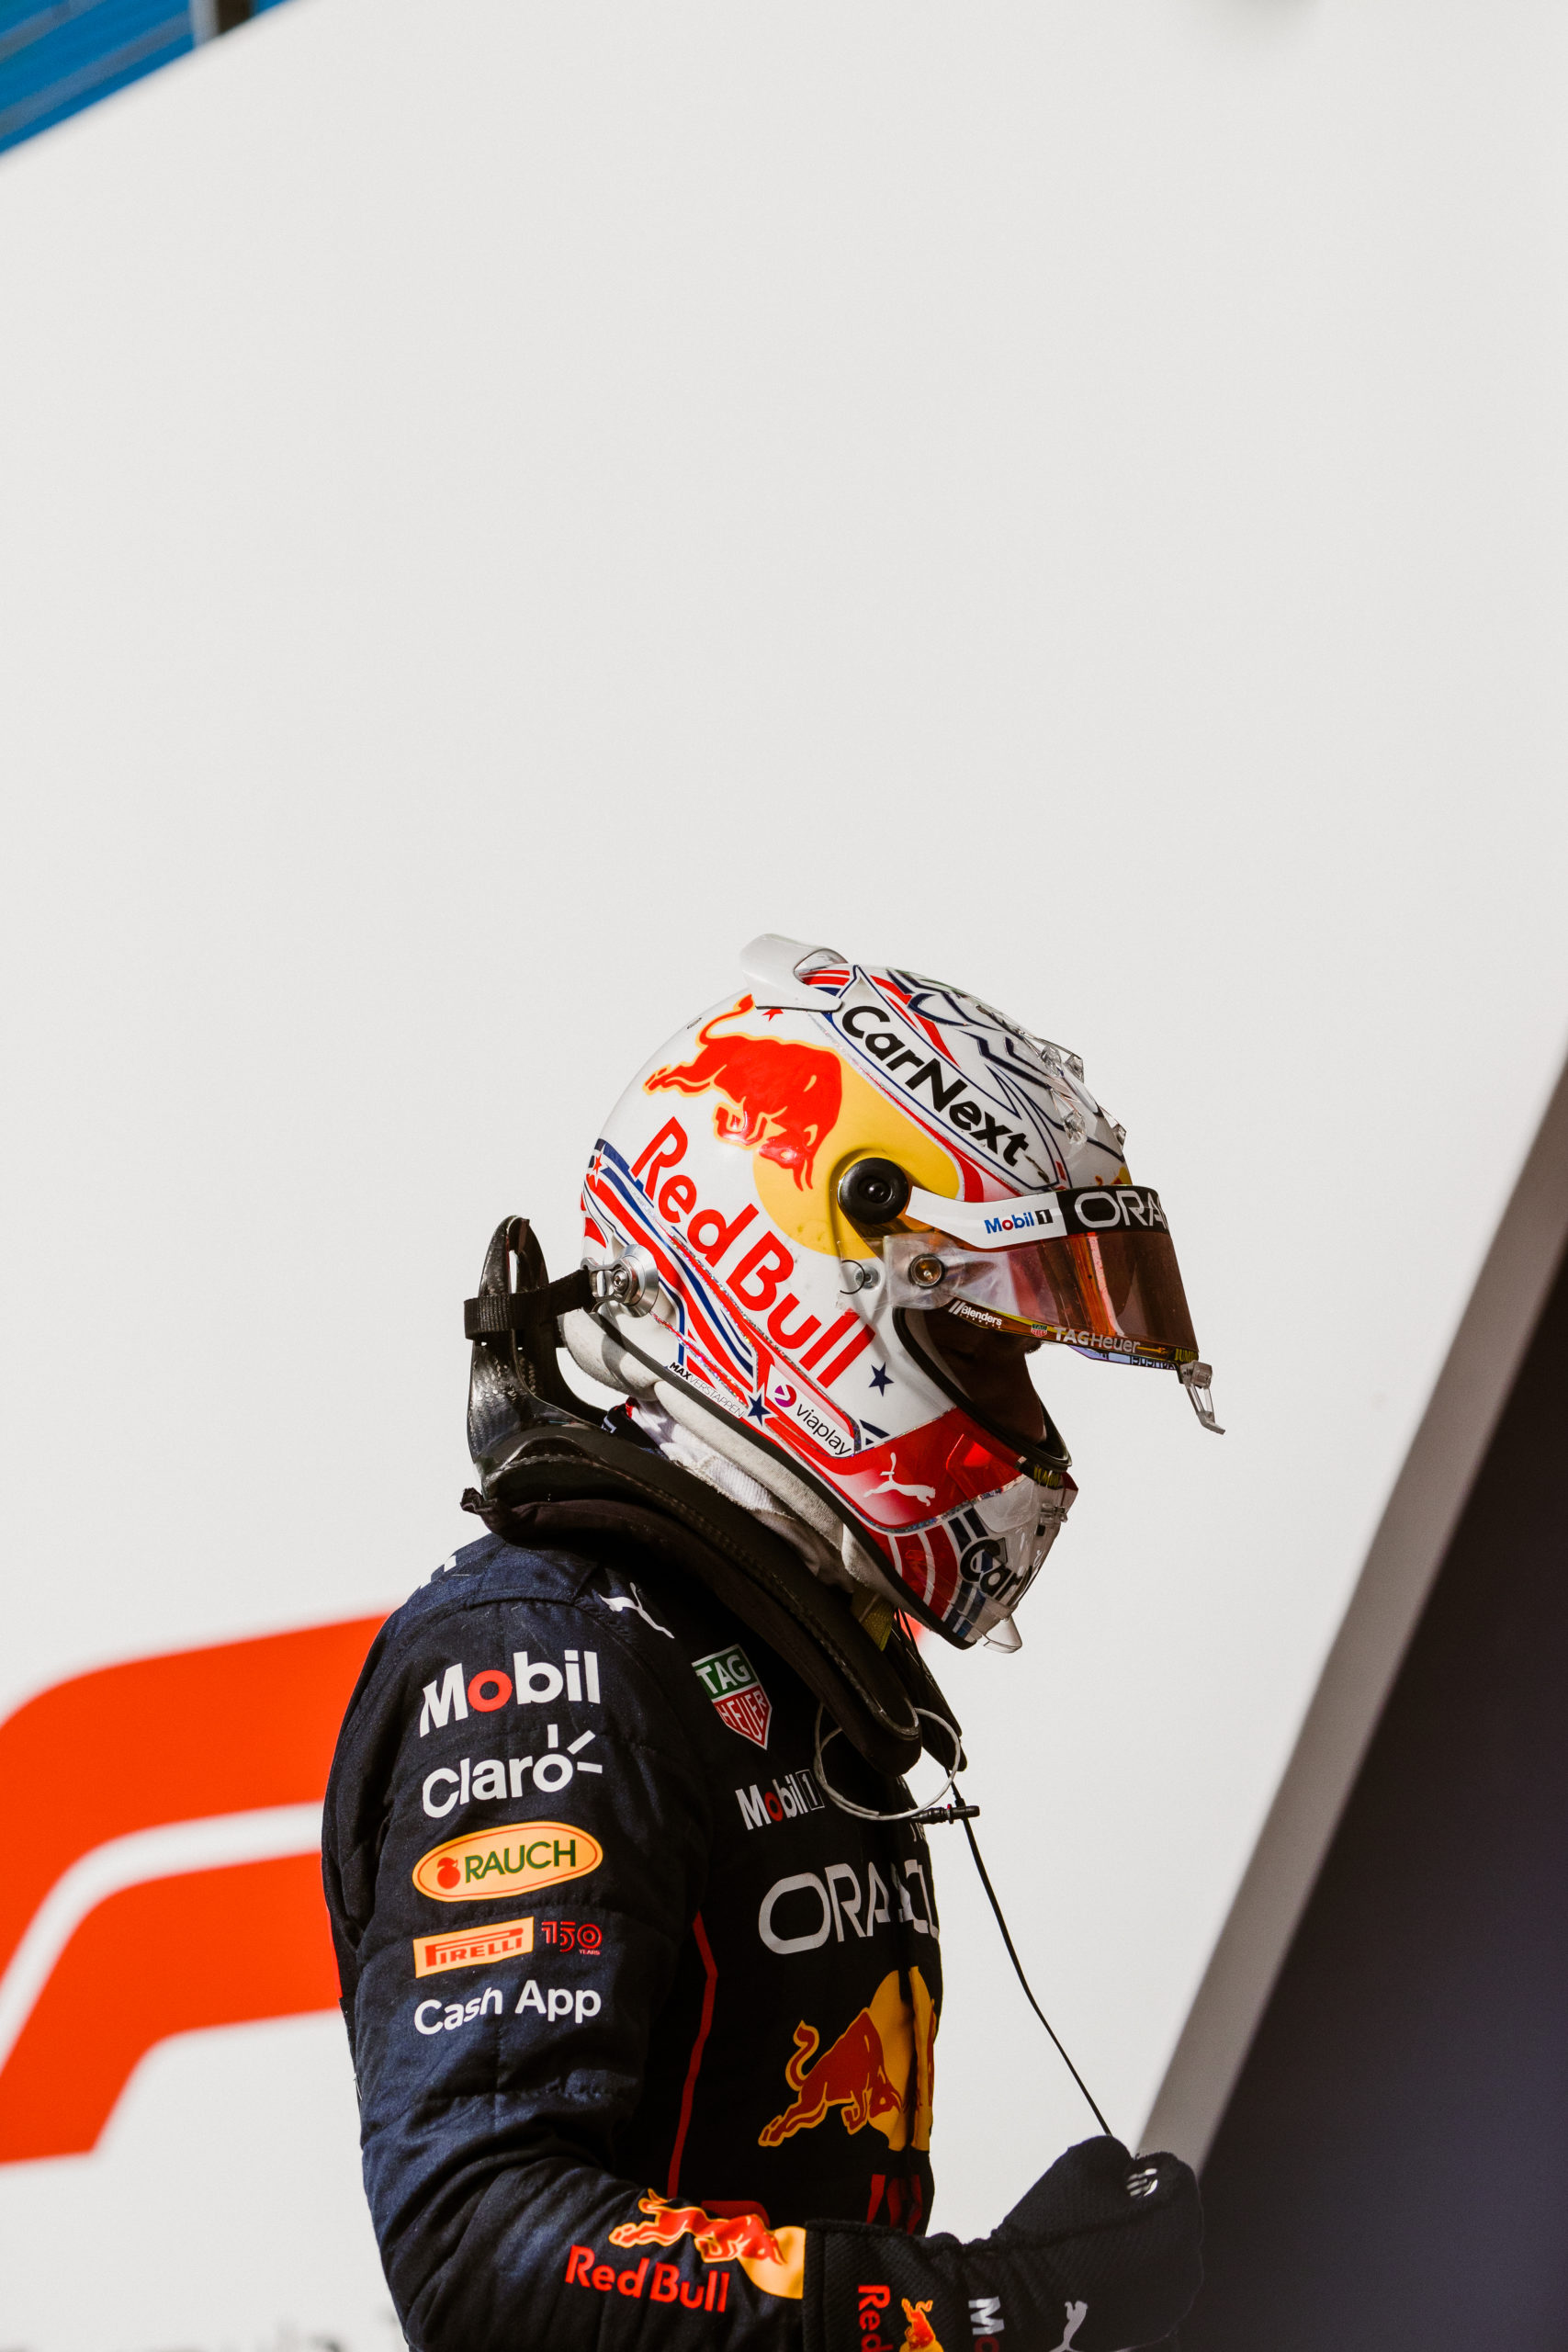 Oracle Red Bull Racing's Max Verstappen stands atop his car as he celebrates taking victory at the 2022 Formula 1 Aramco United States Grand Prix at Circuit of the Americas.